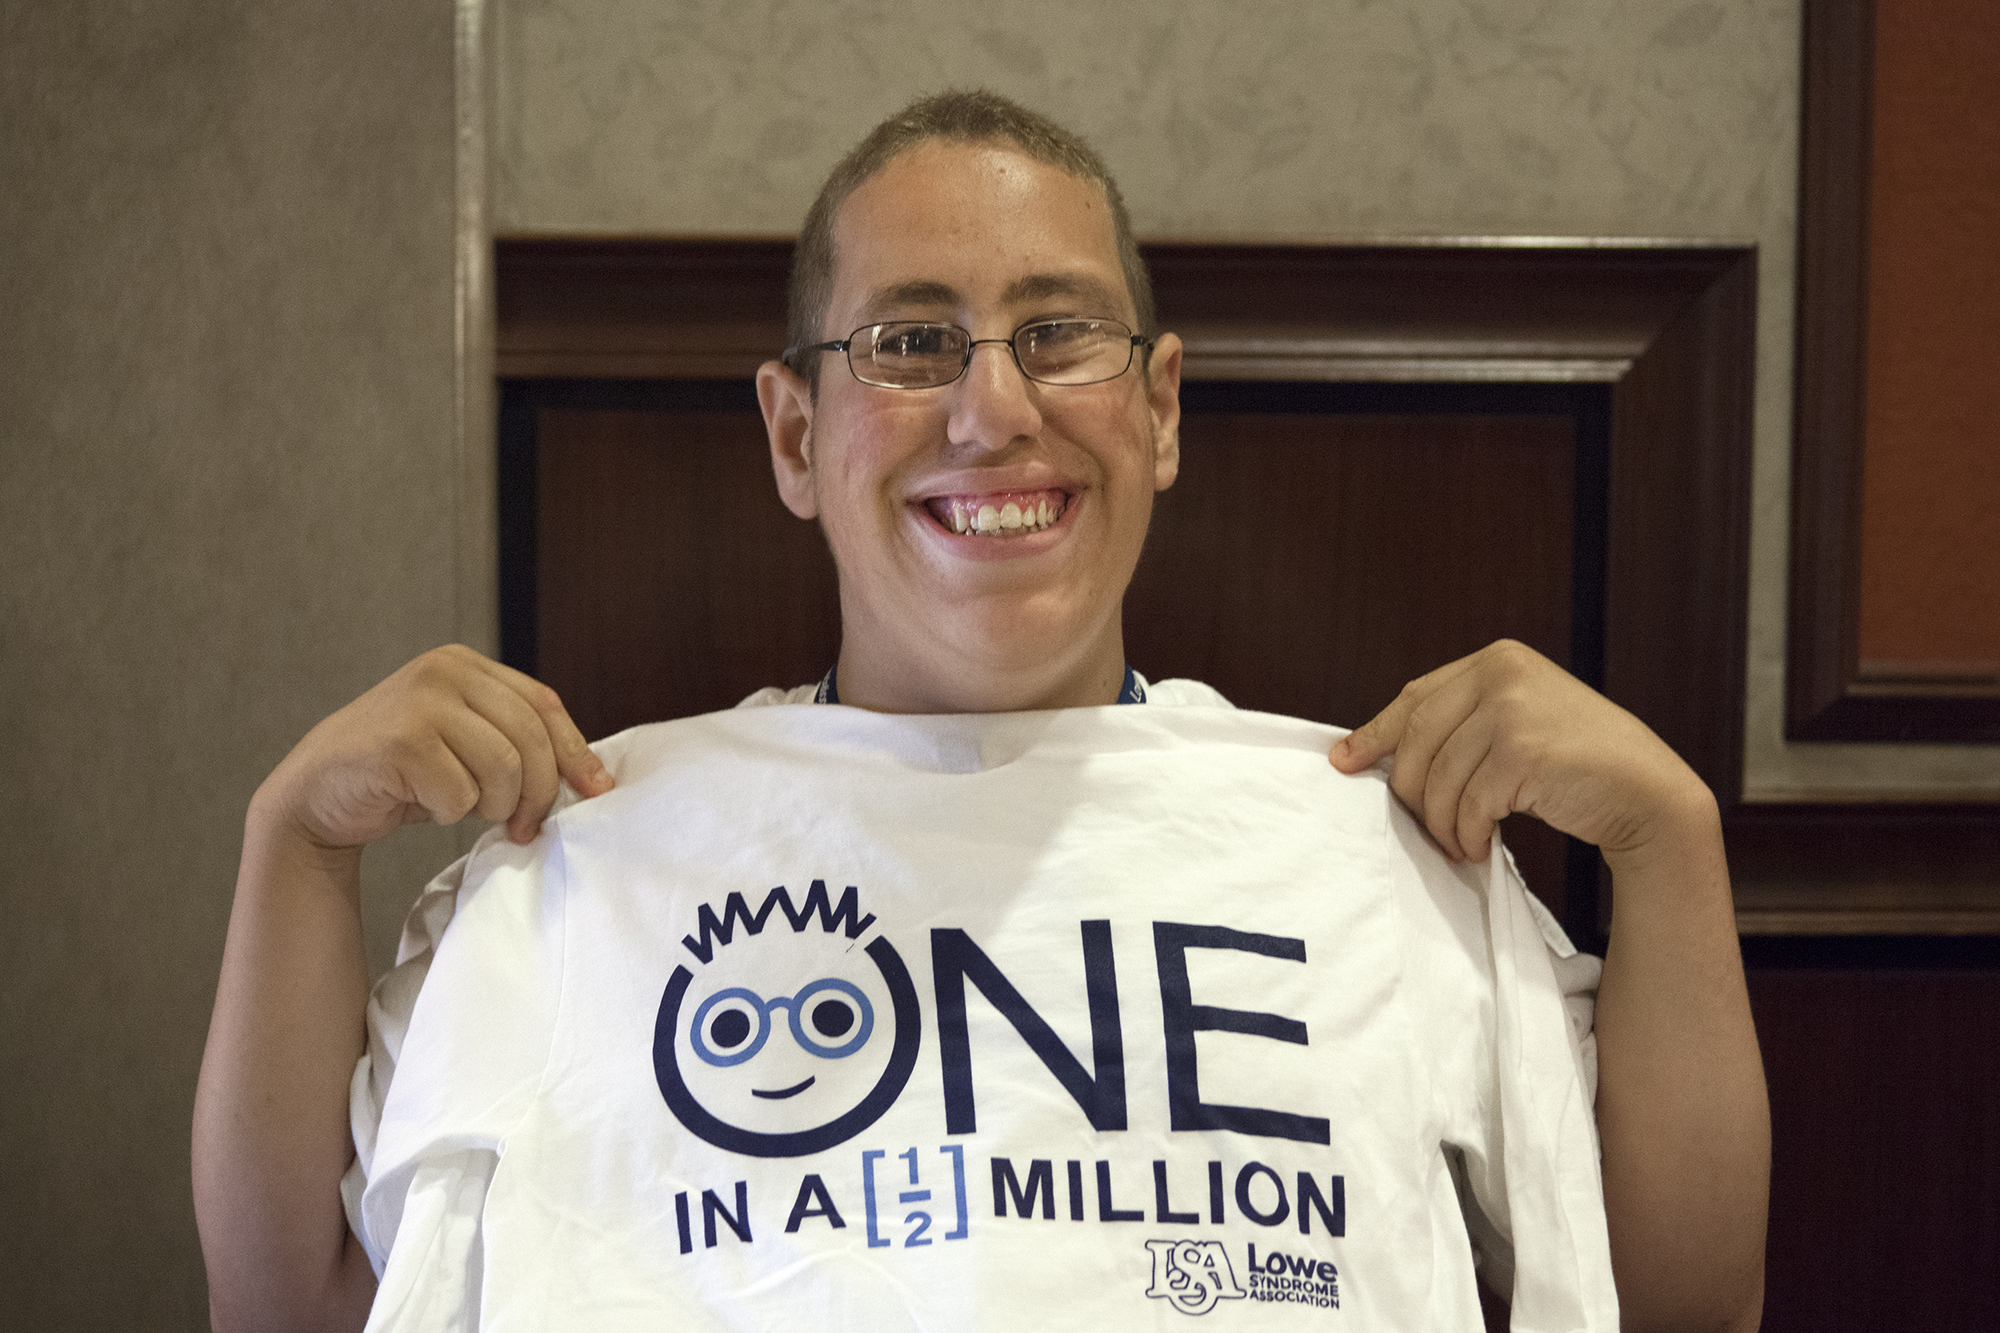 Young man with Lowe syndrome smiling while holding a conference t shirt